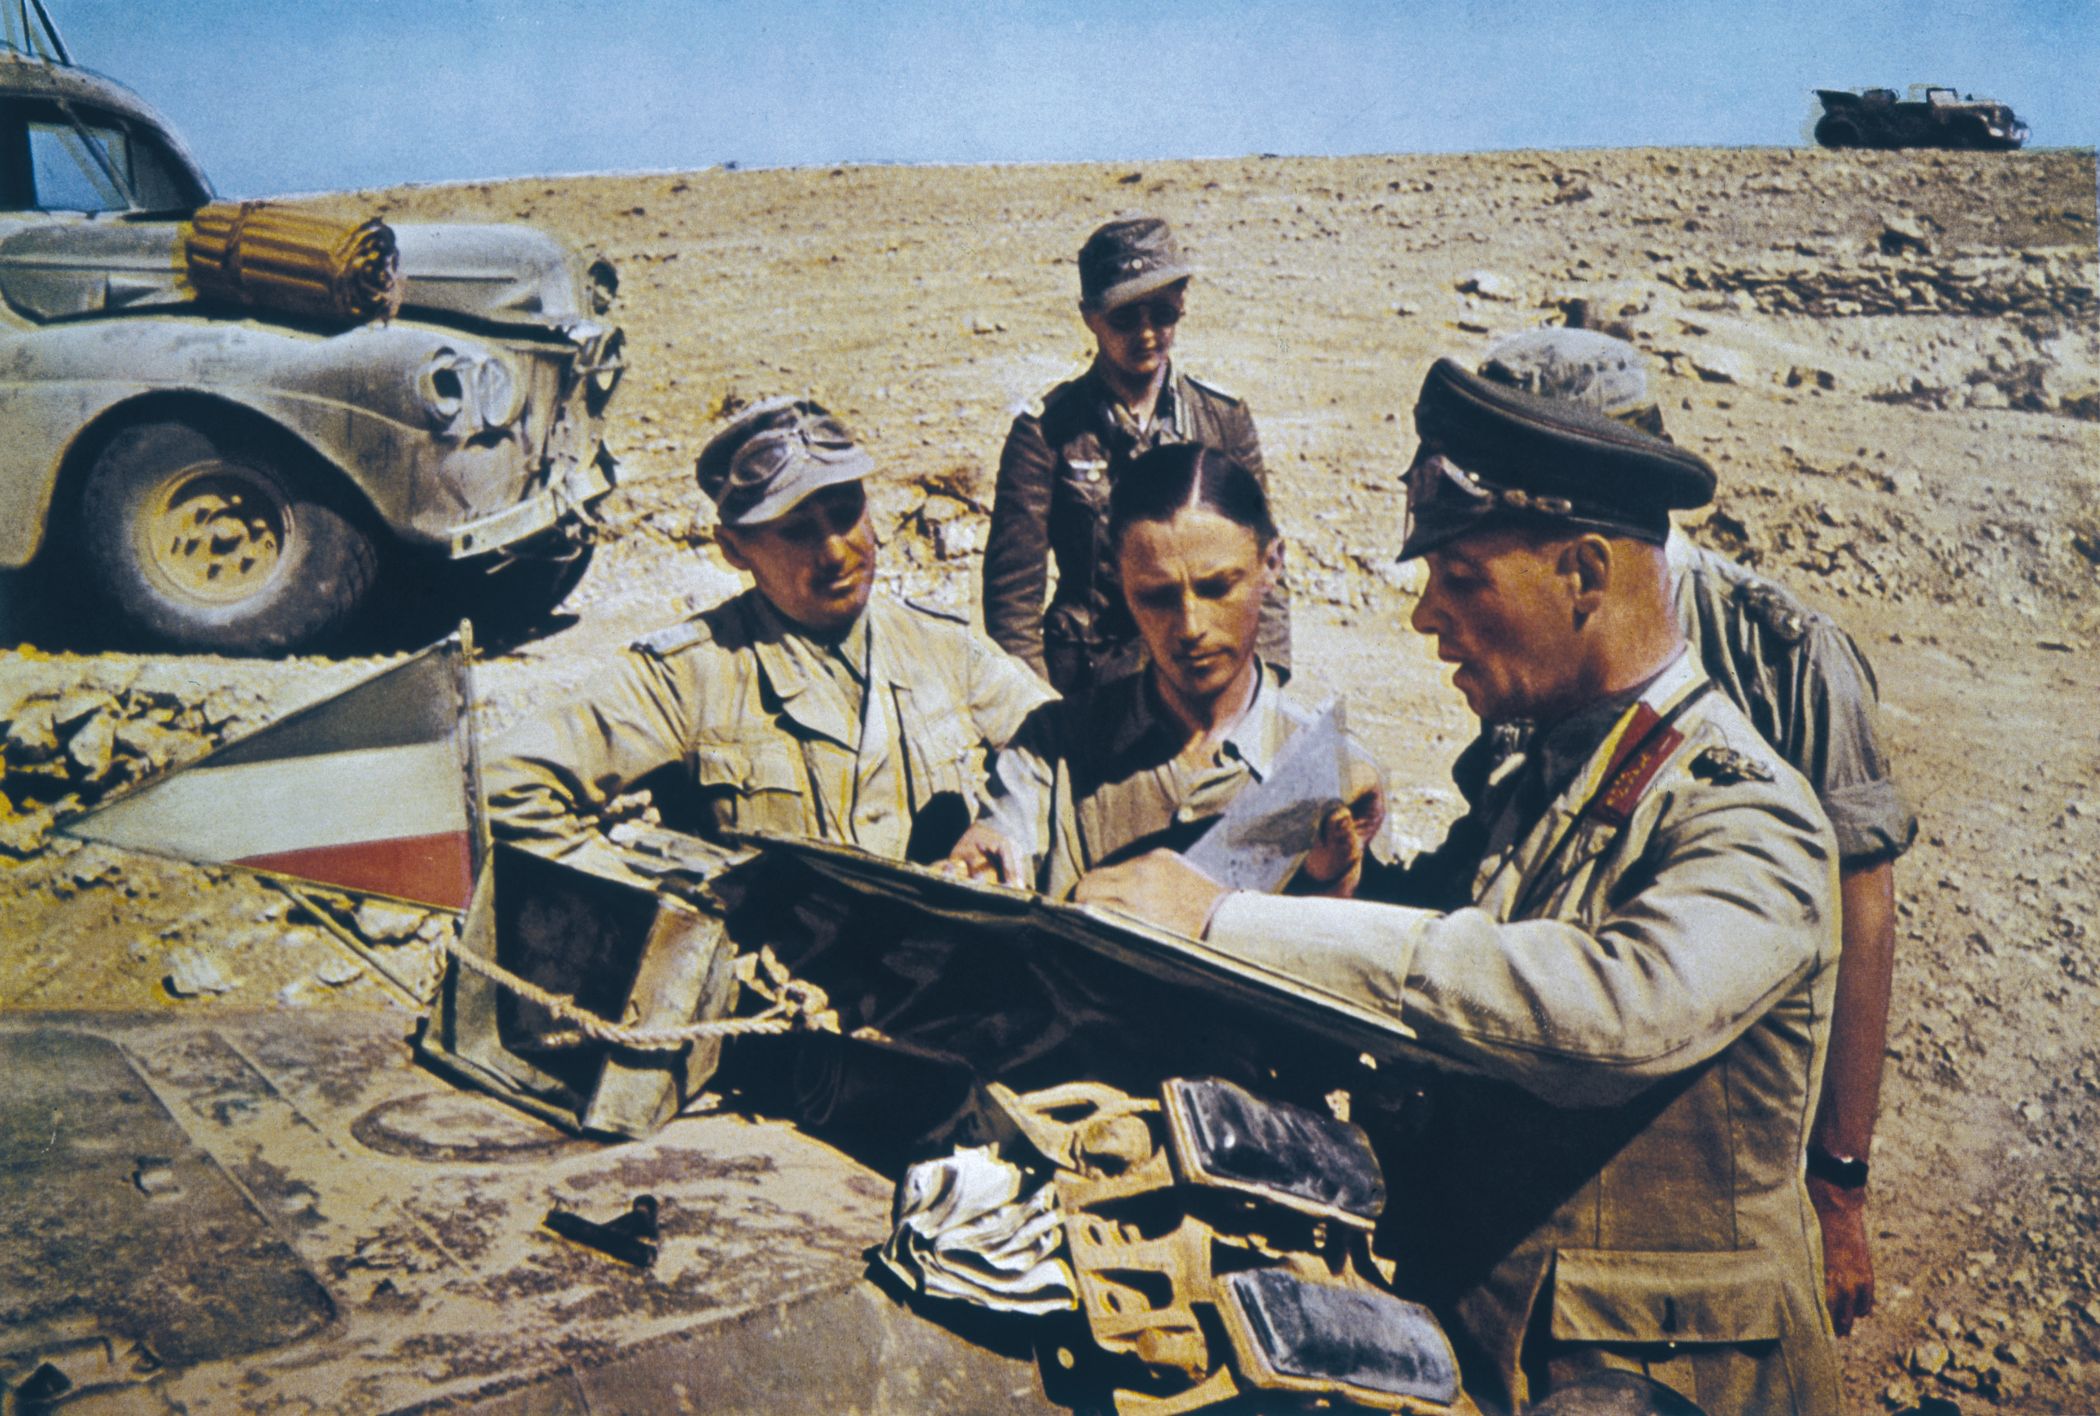 Field Marshal Erwin Rommel, commander of the Afrika Korps, earned the nickname of the Desert Fox" during a virtually uninterrupted string of victories that made him a legend.